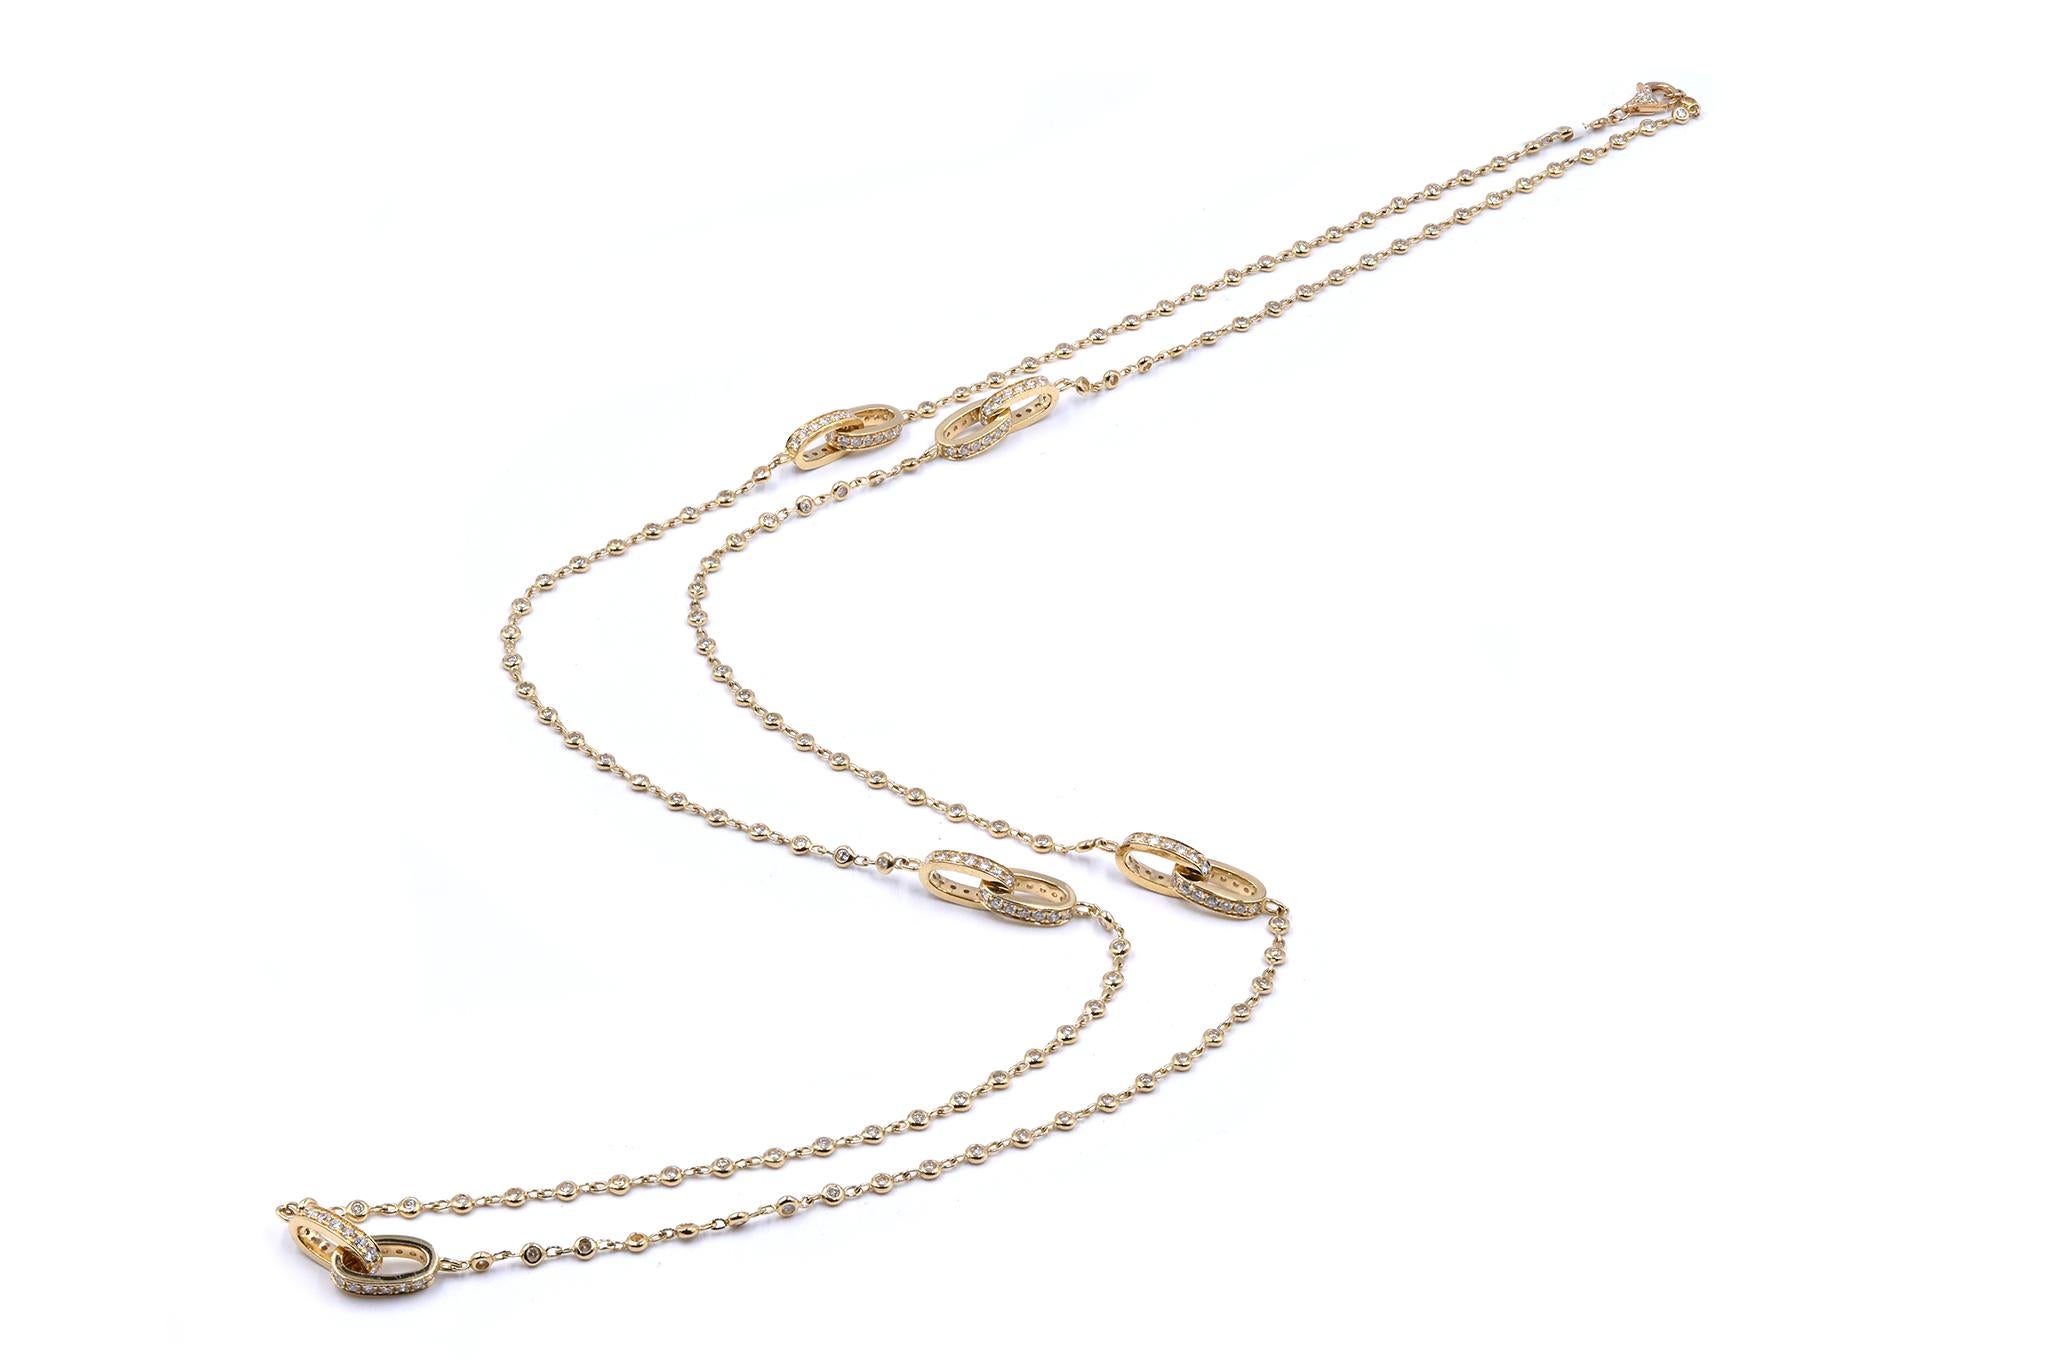 Designer: custom
Material: 18K yellow gold
Diamonds: 276 round cut = 3.90cttw
Color: G
Clarity: VS1
Dimensions: necklace measures 32-inches in length
Weight: 18.69 grams
